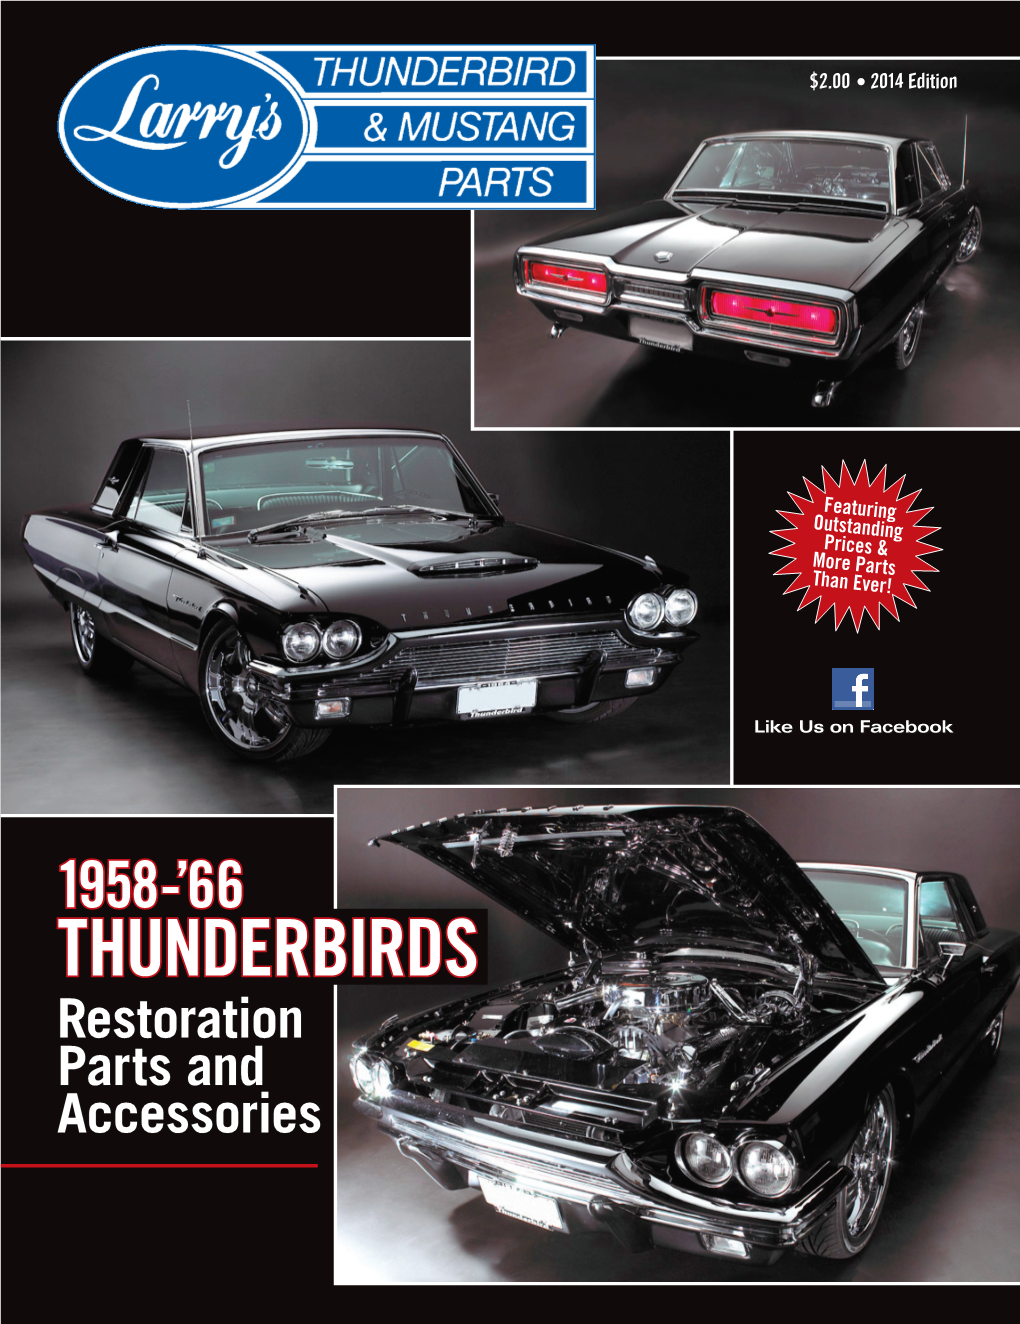 THUNDERBIRDS Restoration Parts and Accessories WELCOME to LARRY’S THUNDERBIRD & MUSTANG PARTS